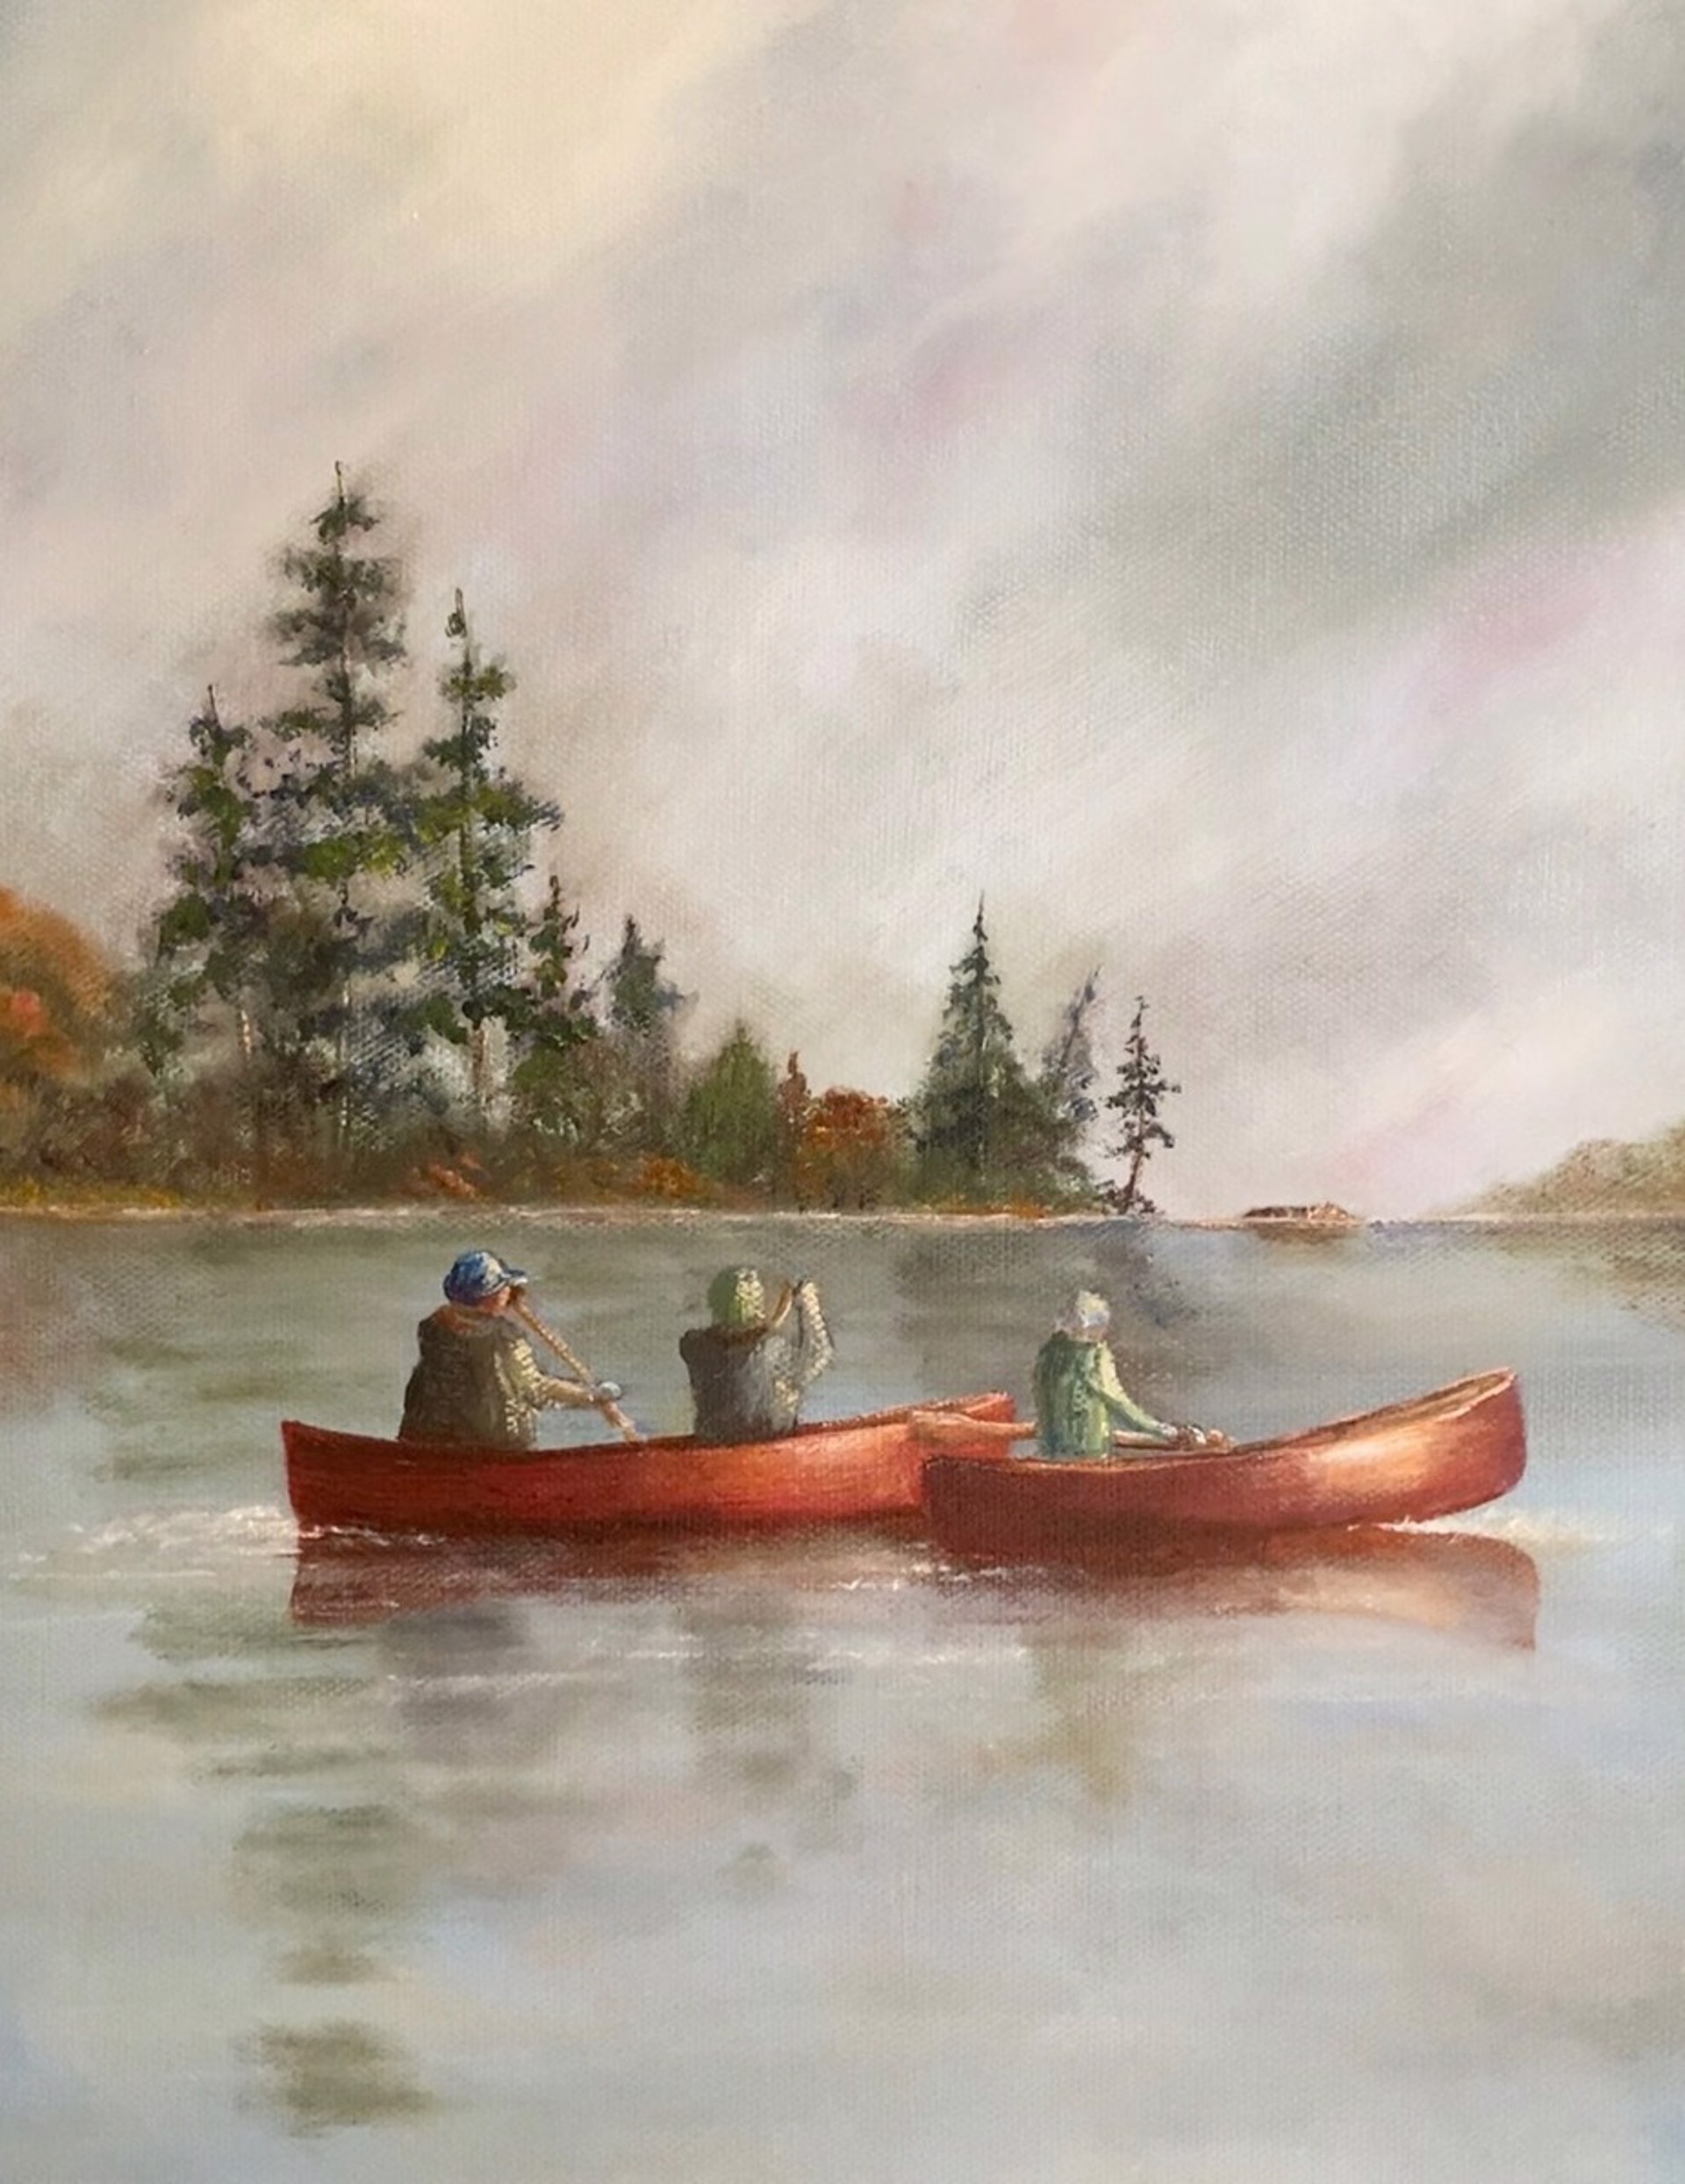 Thanksgiving at the Lake by Joy McCallister